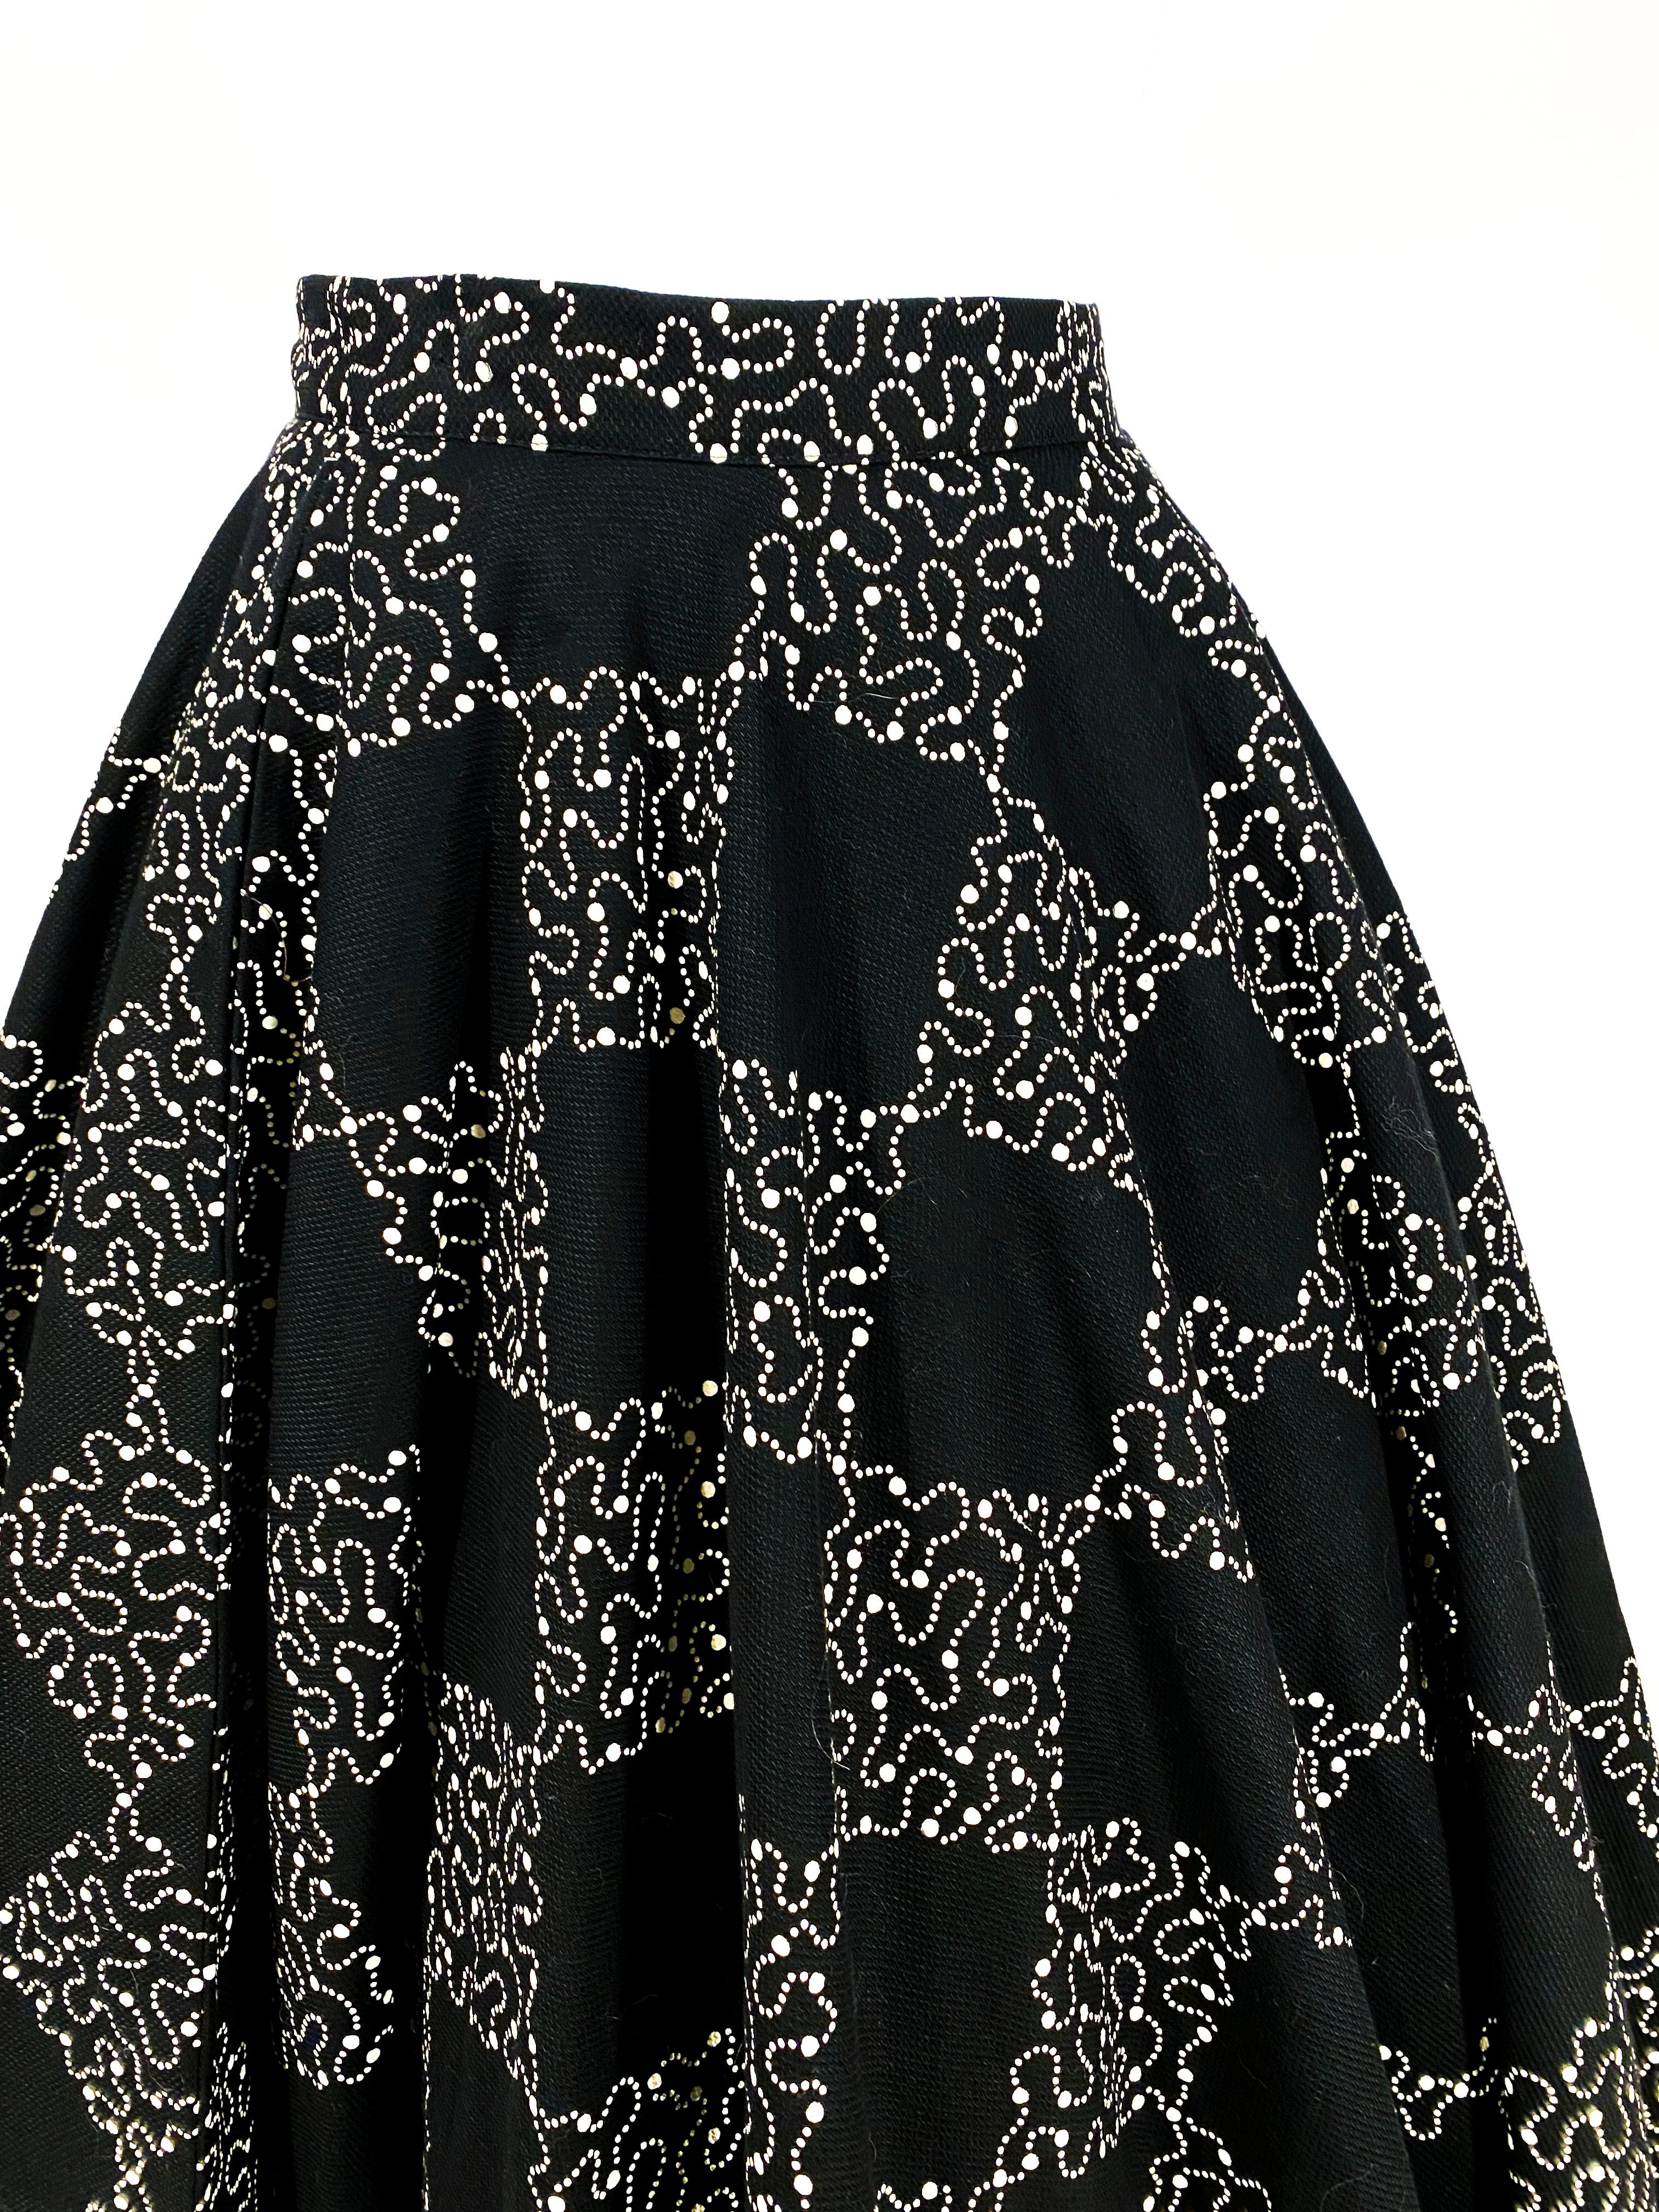 1950s black pique full circle skirt featuring a dotted line checkerboard print in a contrasting white. There is a side metal zipper closure on one side and a useable hidden pocket on the other side. This skirt is meant to be worn with a petticoat as